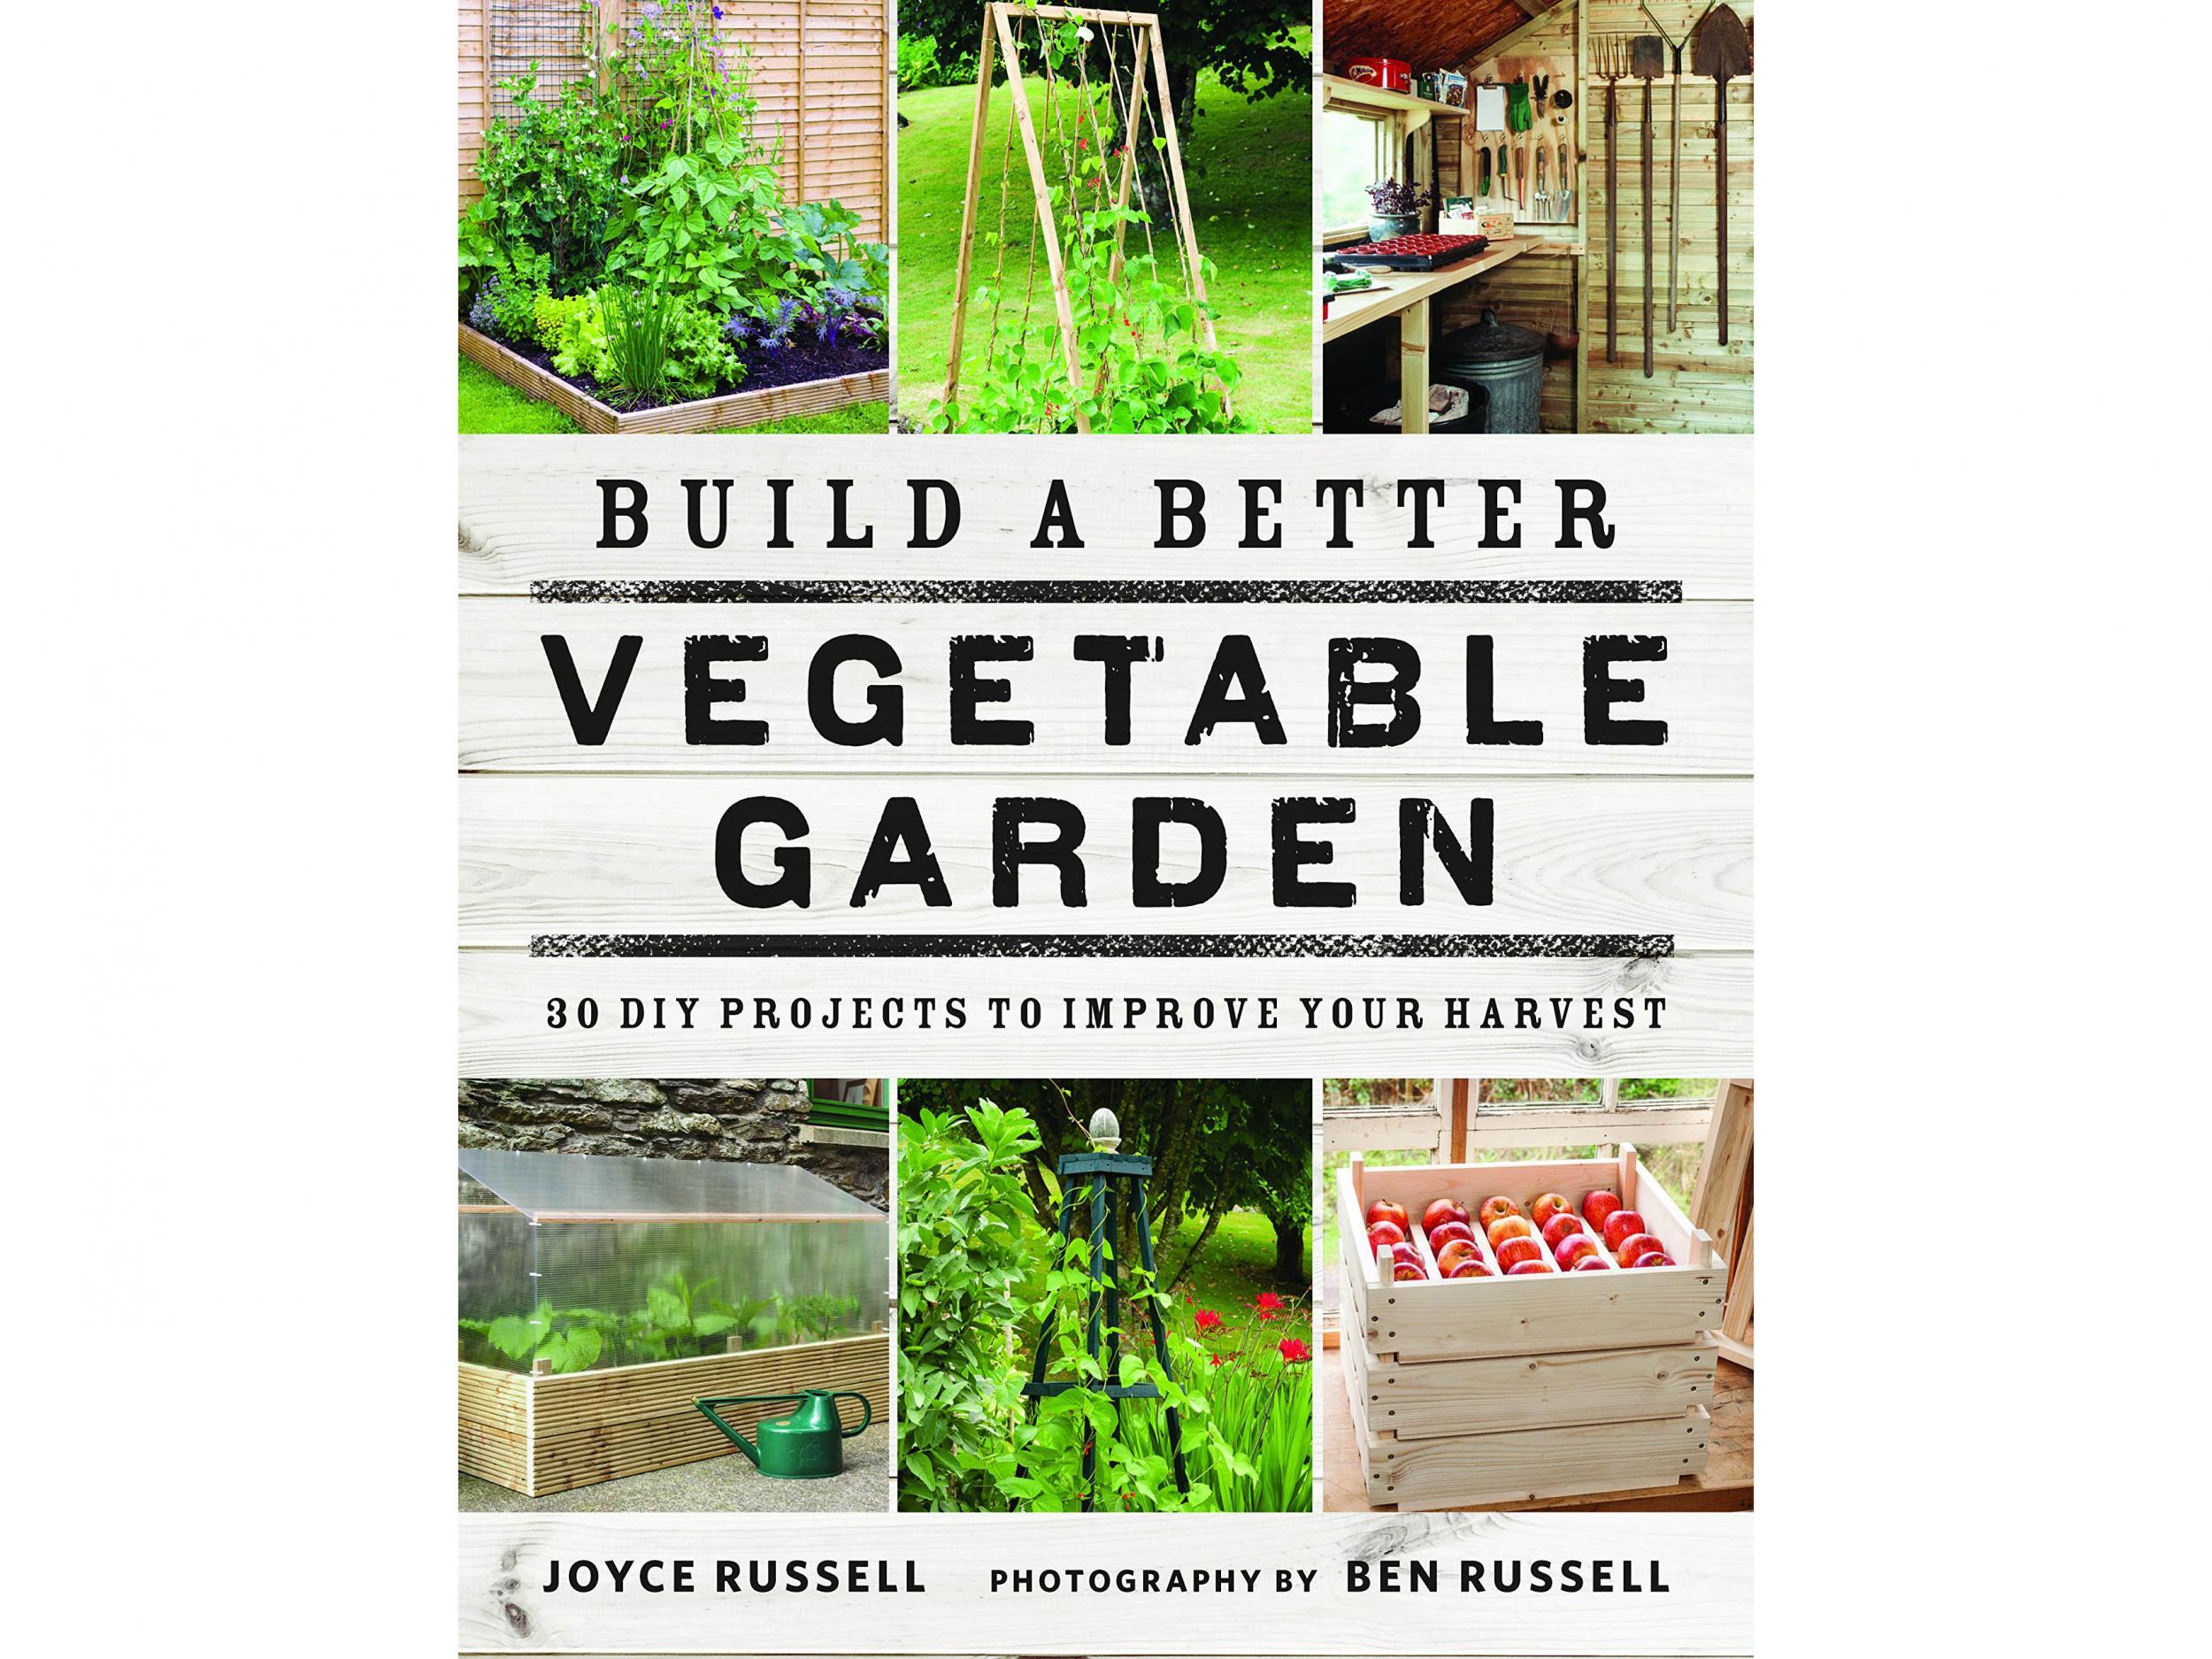 For larger green spaces, learn practical tips on how to harvest your own produce successfully with this title (A